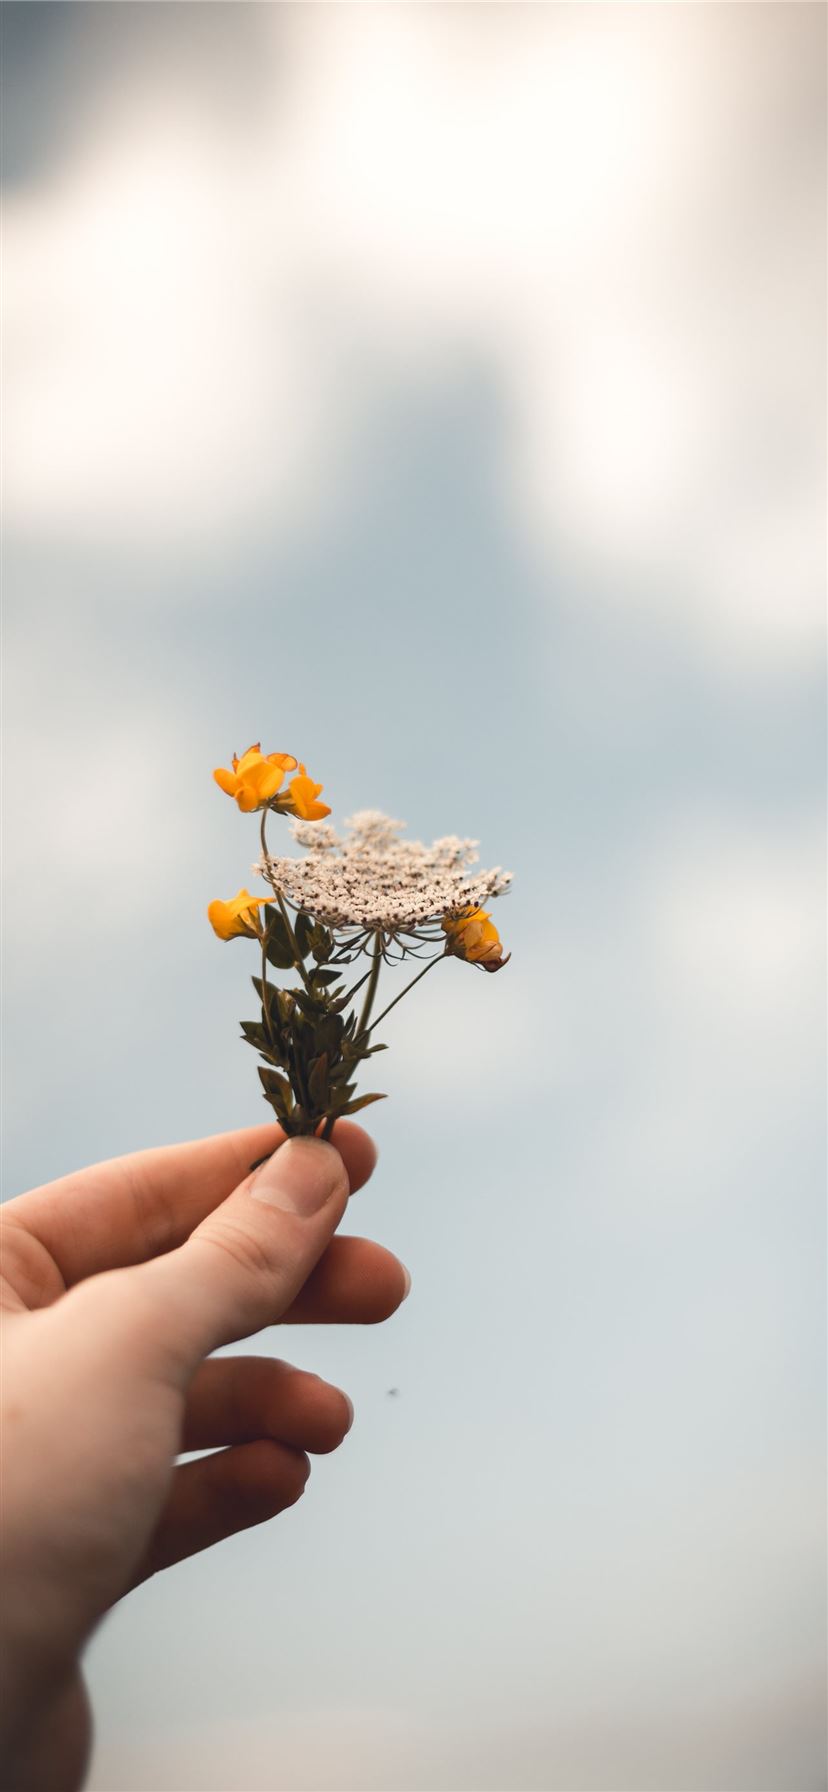 person holding flowers iPhone 11 wallpaper 